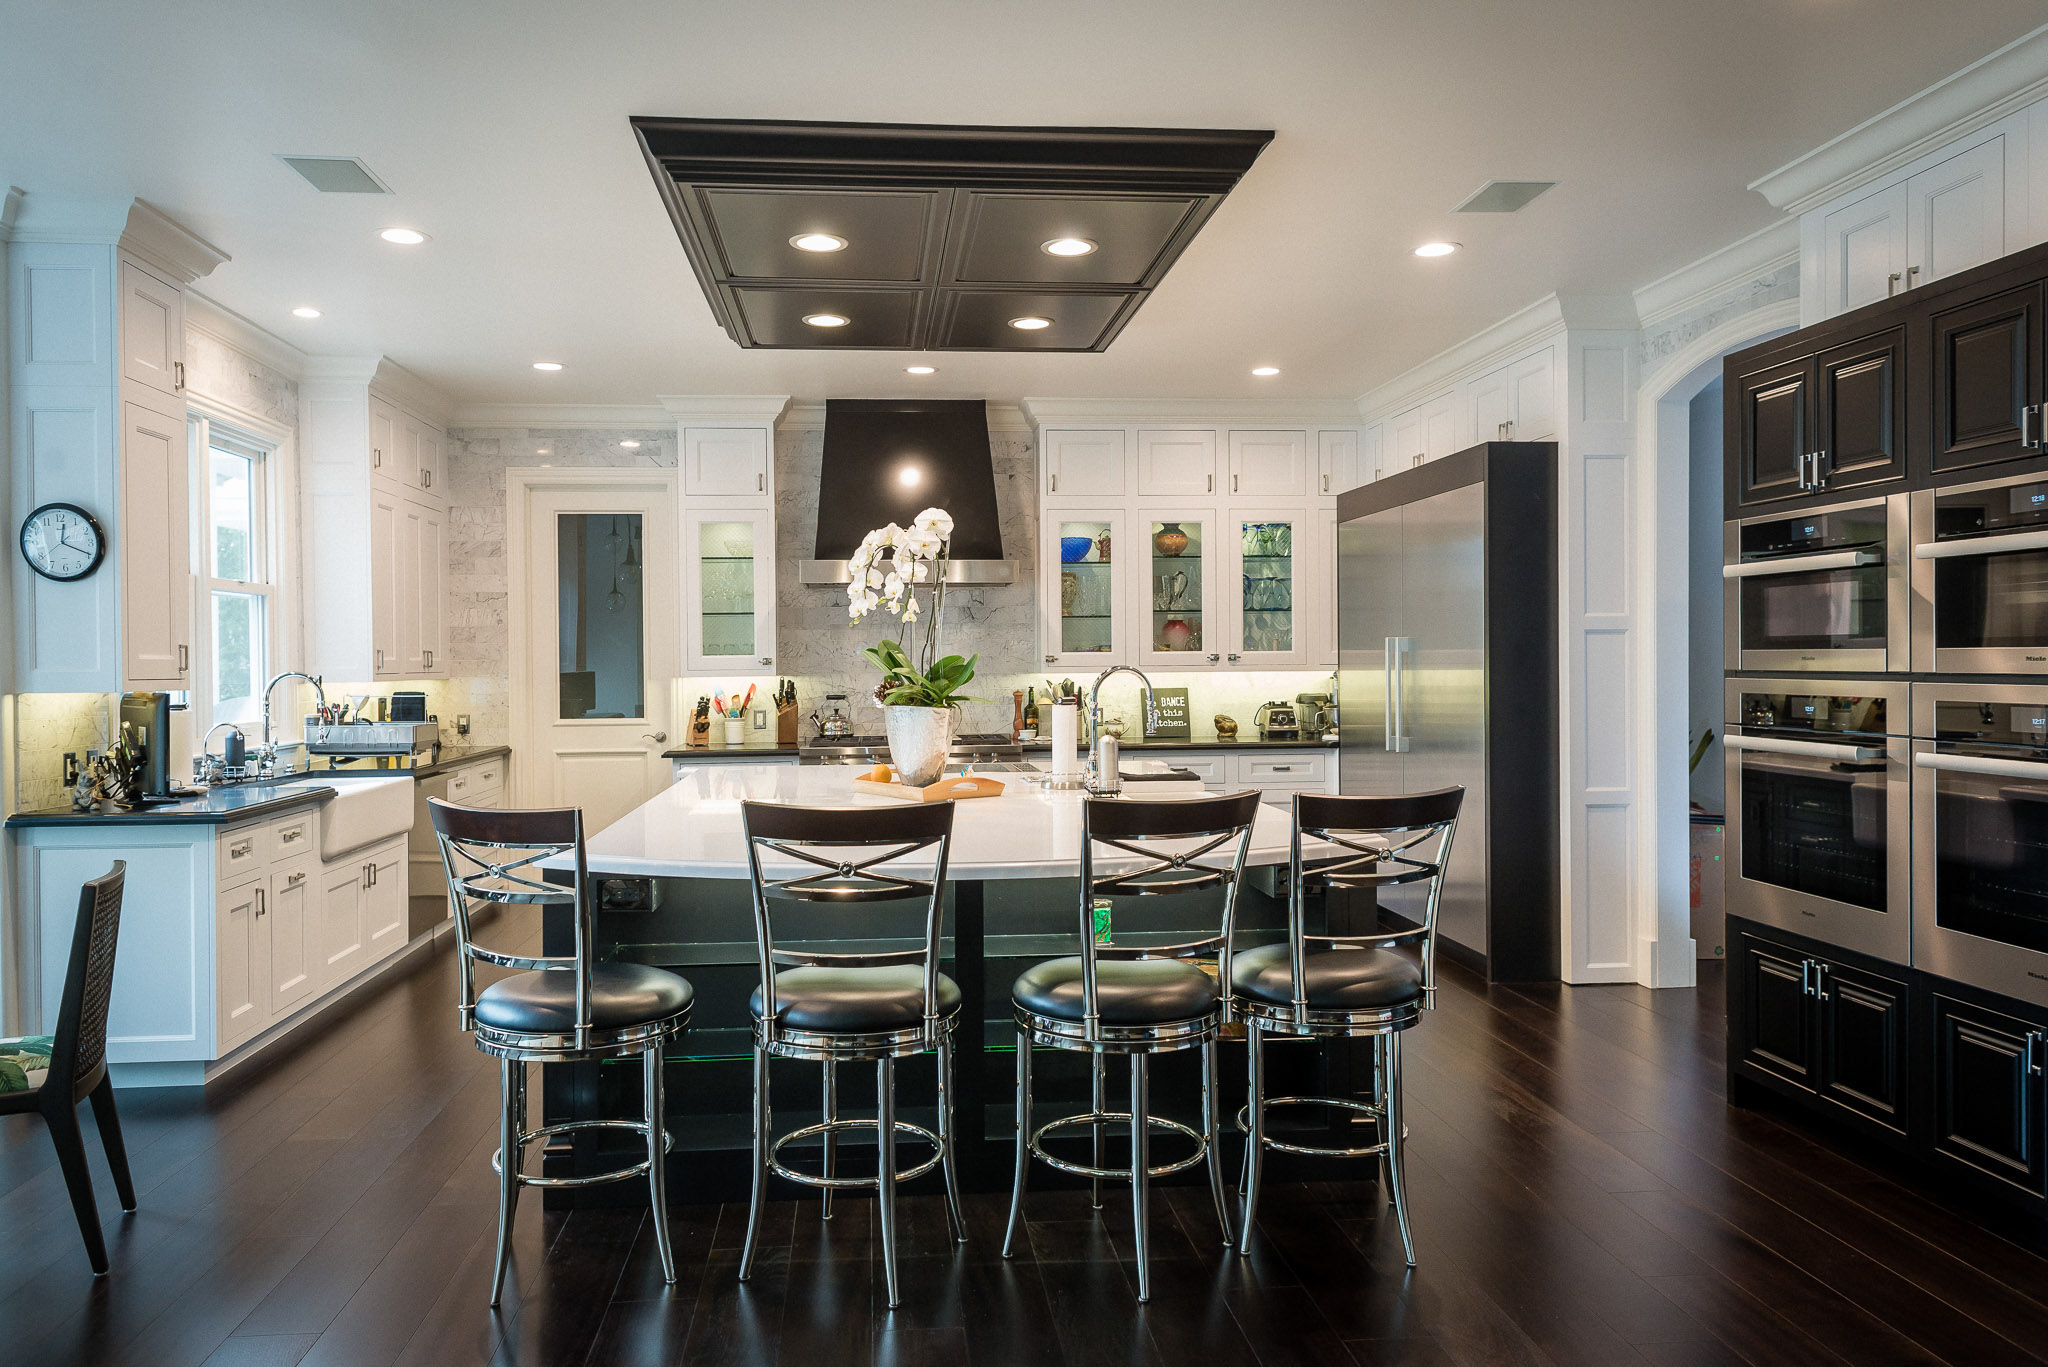 Modern kitchen with island and bar stools.